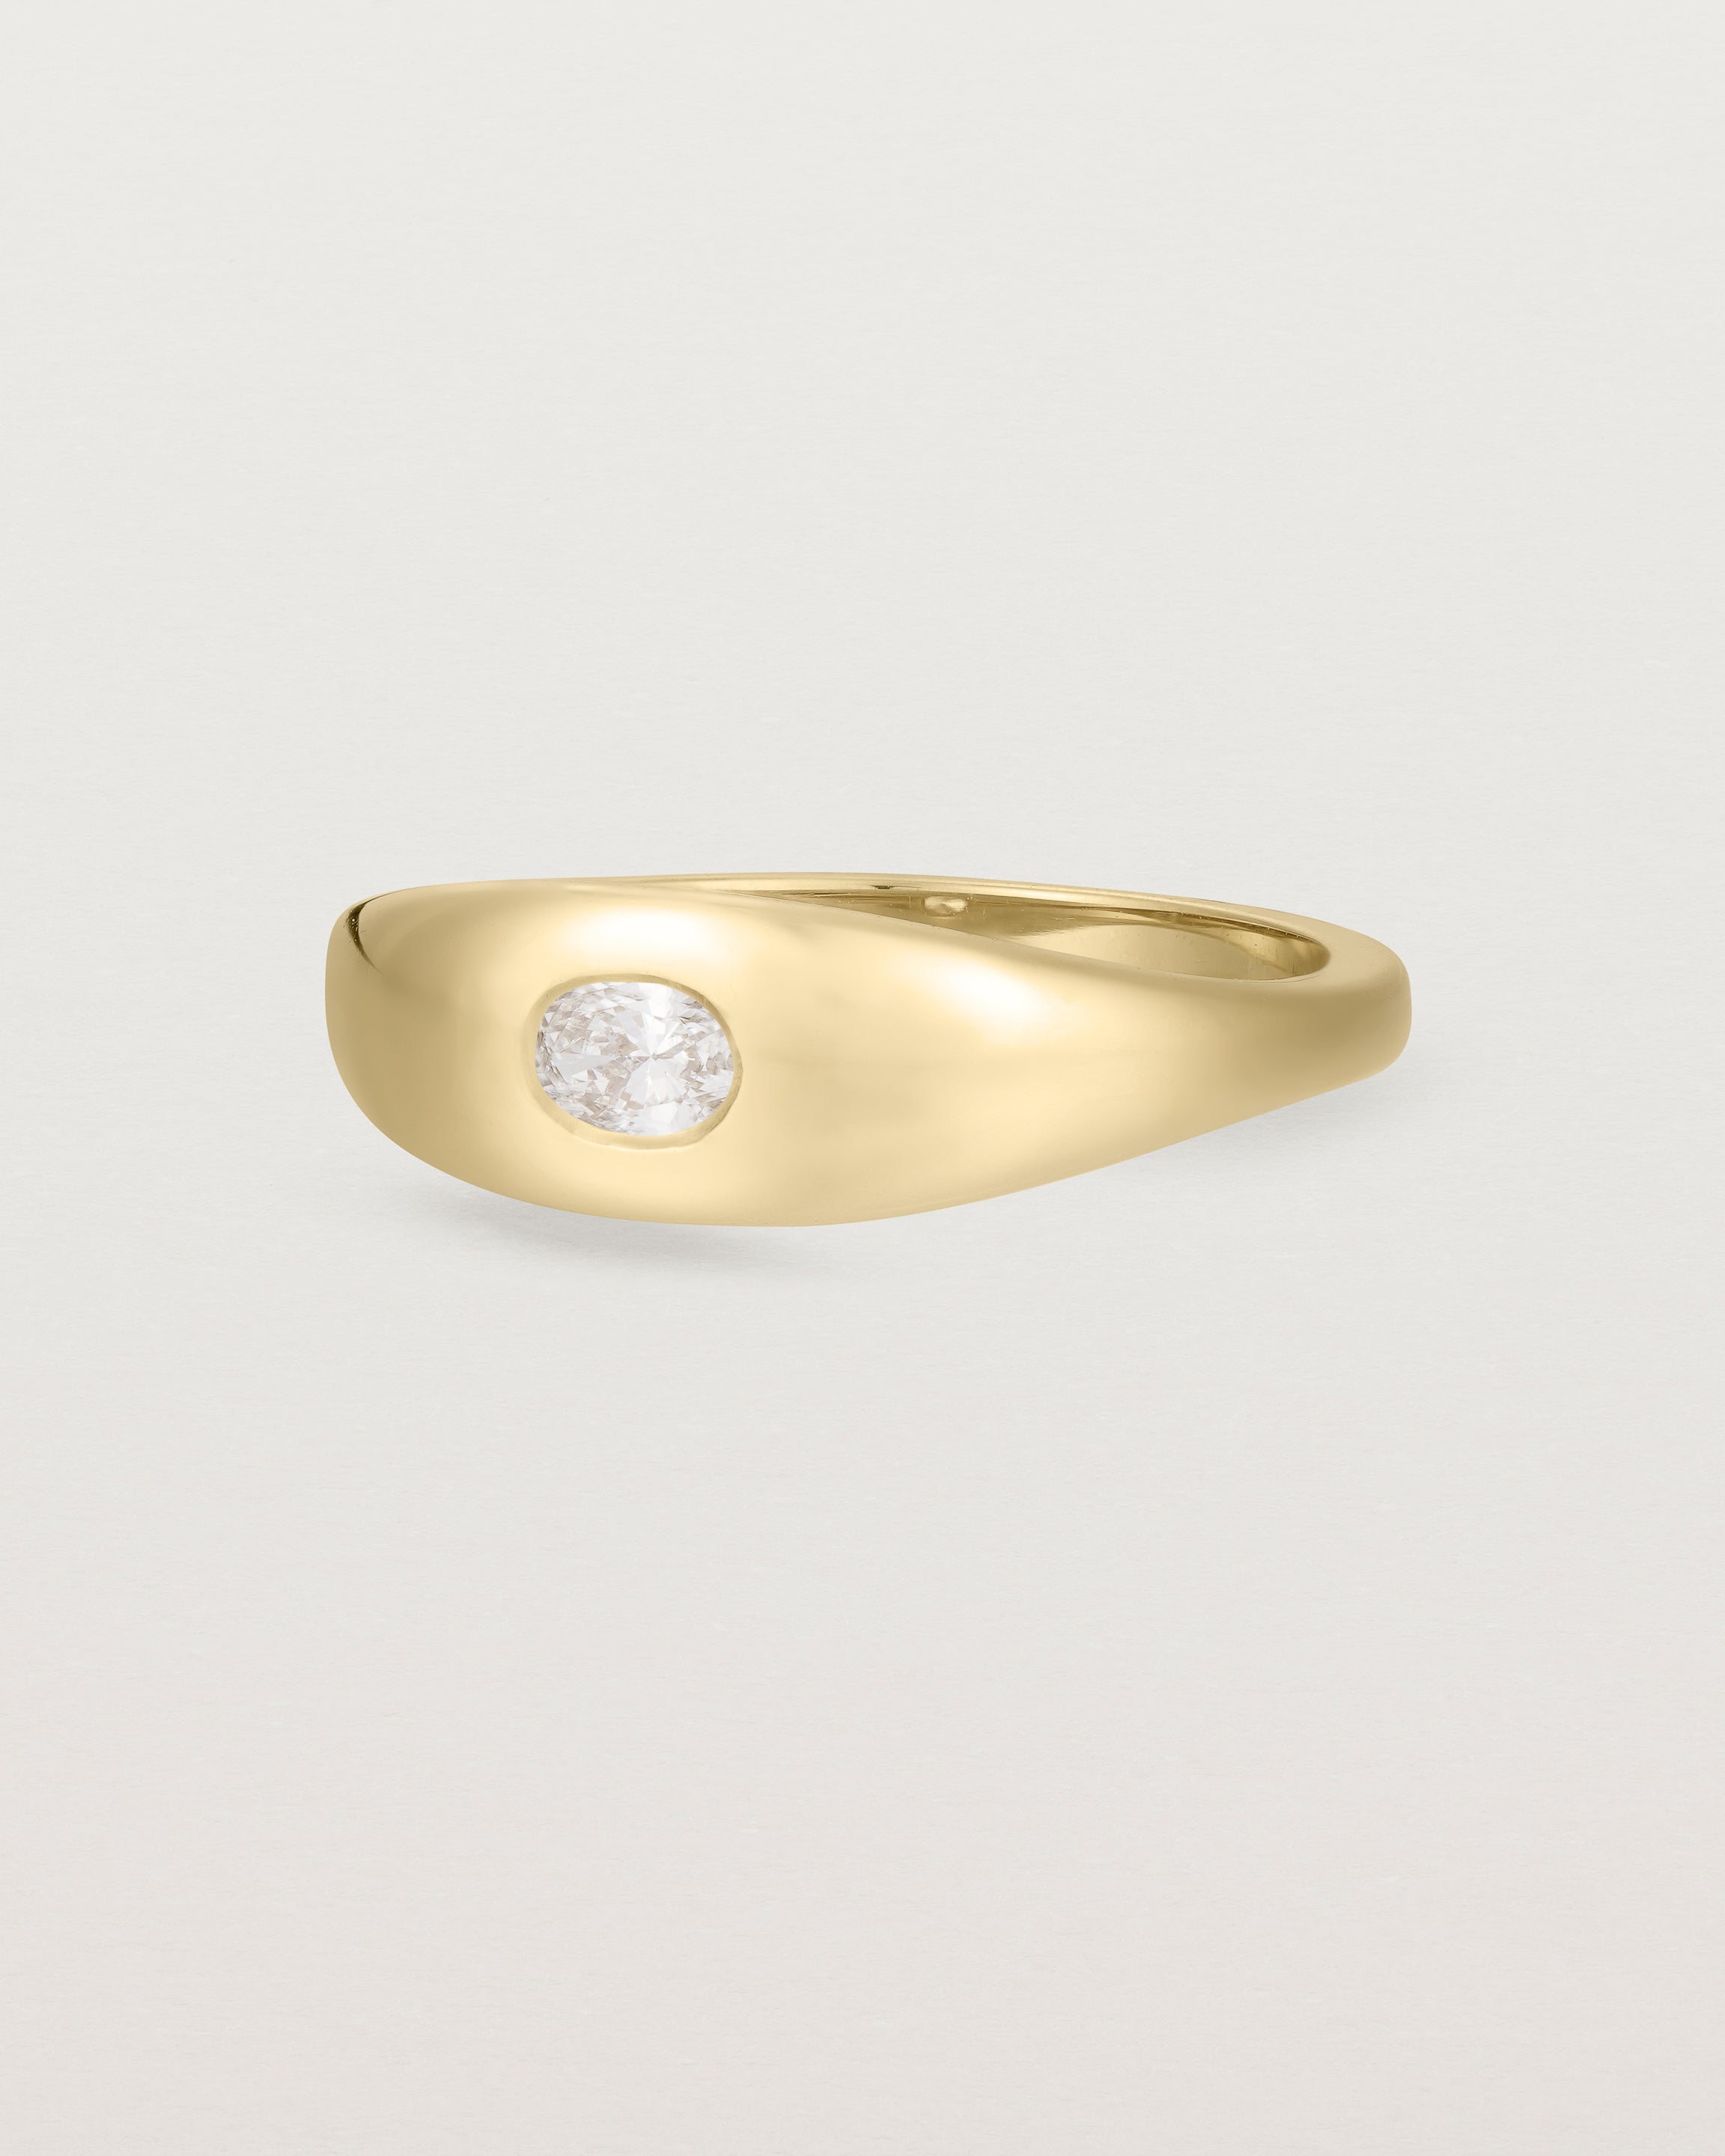 Angled view of the Seule Single Ring | Diamond | Yellow Gold.